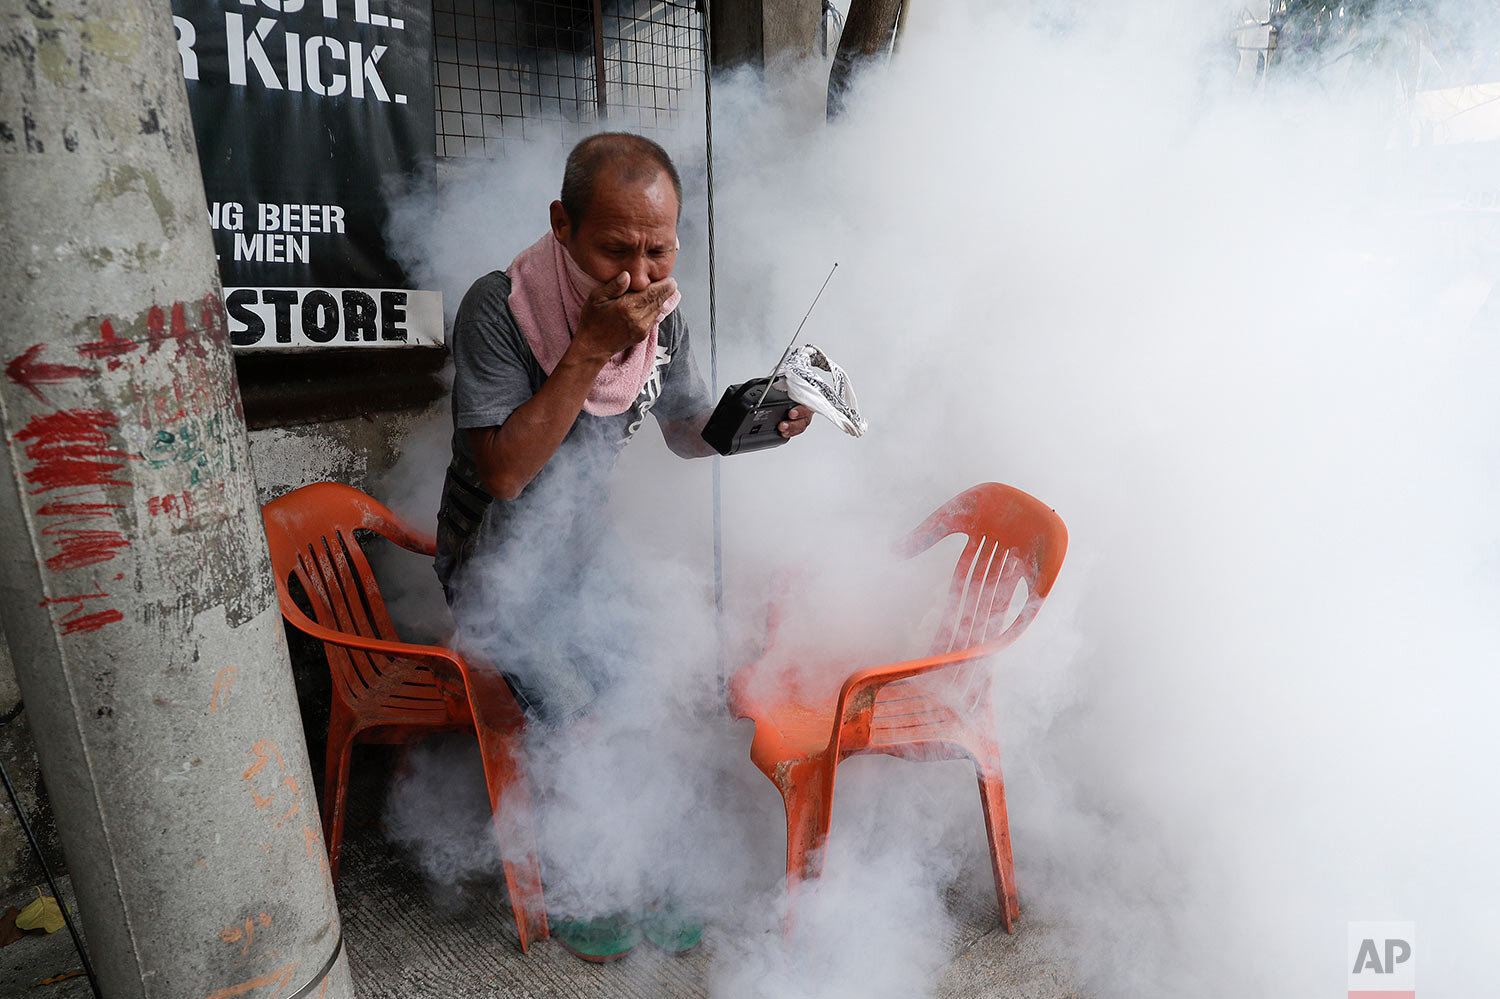  A resident holds his nose and portable radio as he tries to avoid the disinfectants used on their village as a precaution against the spread of COVID-19 in Manila, Philippines on Monday, March 15, 2021. (AP Photo/Aaron Favila) 